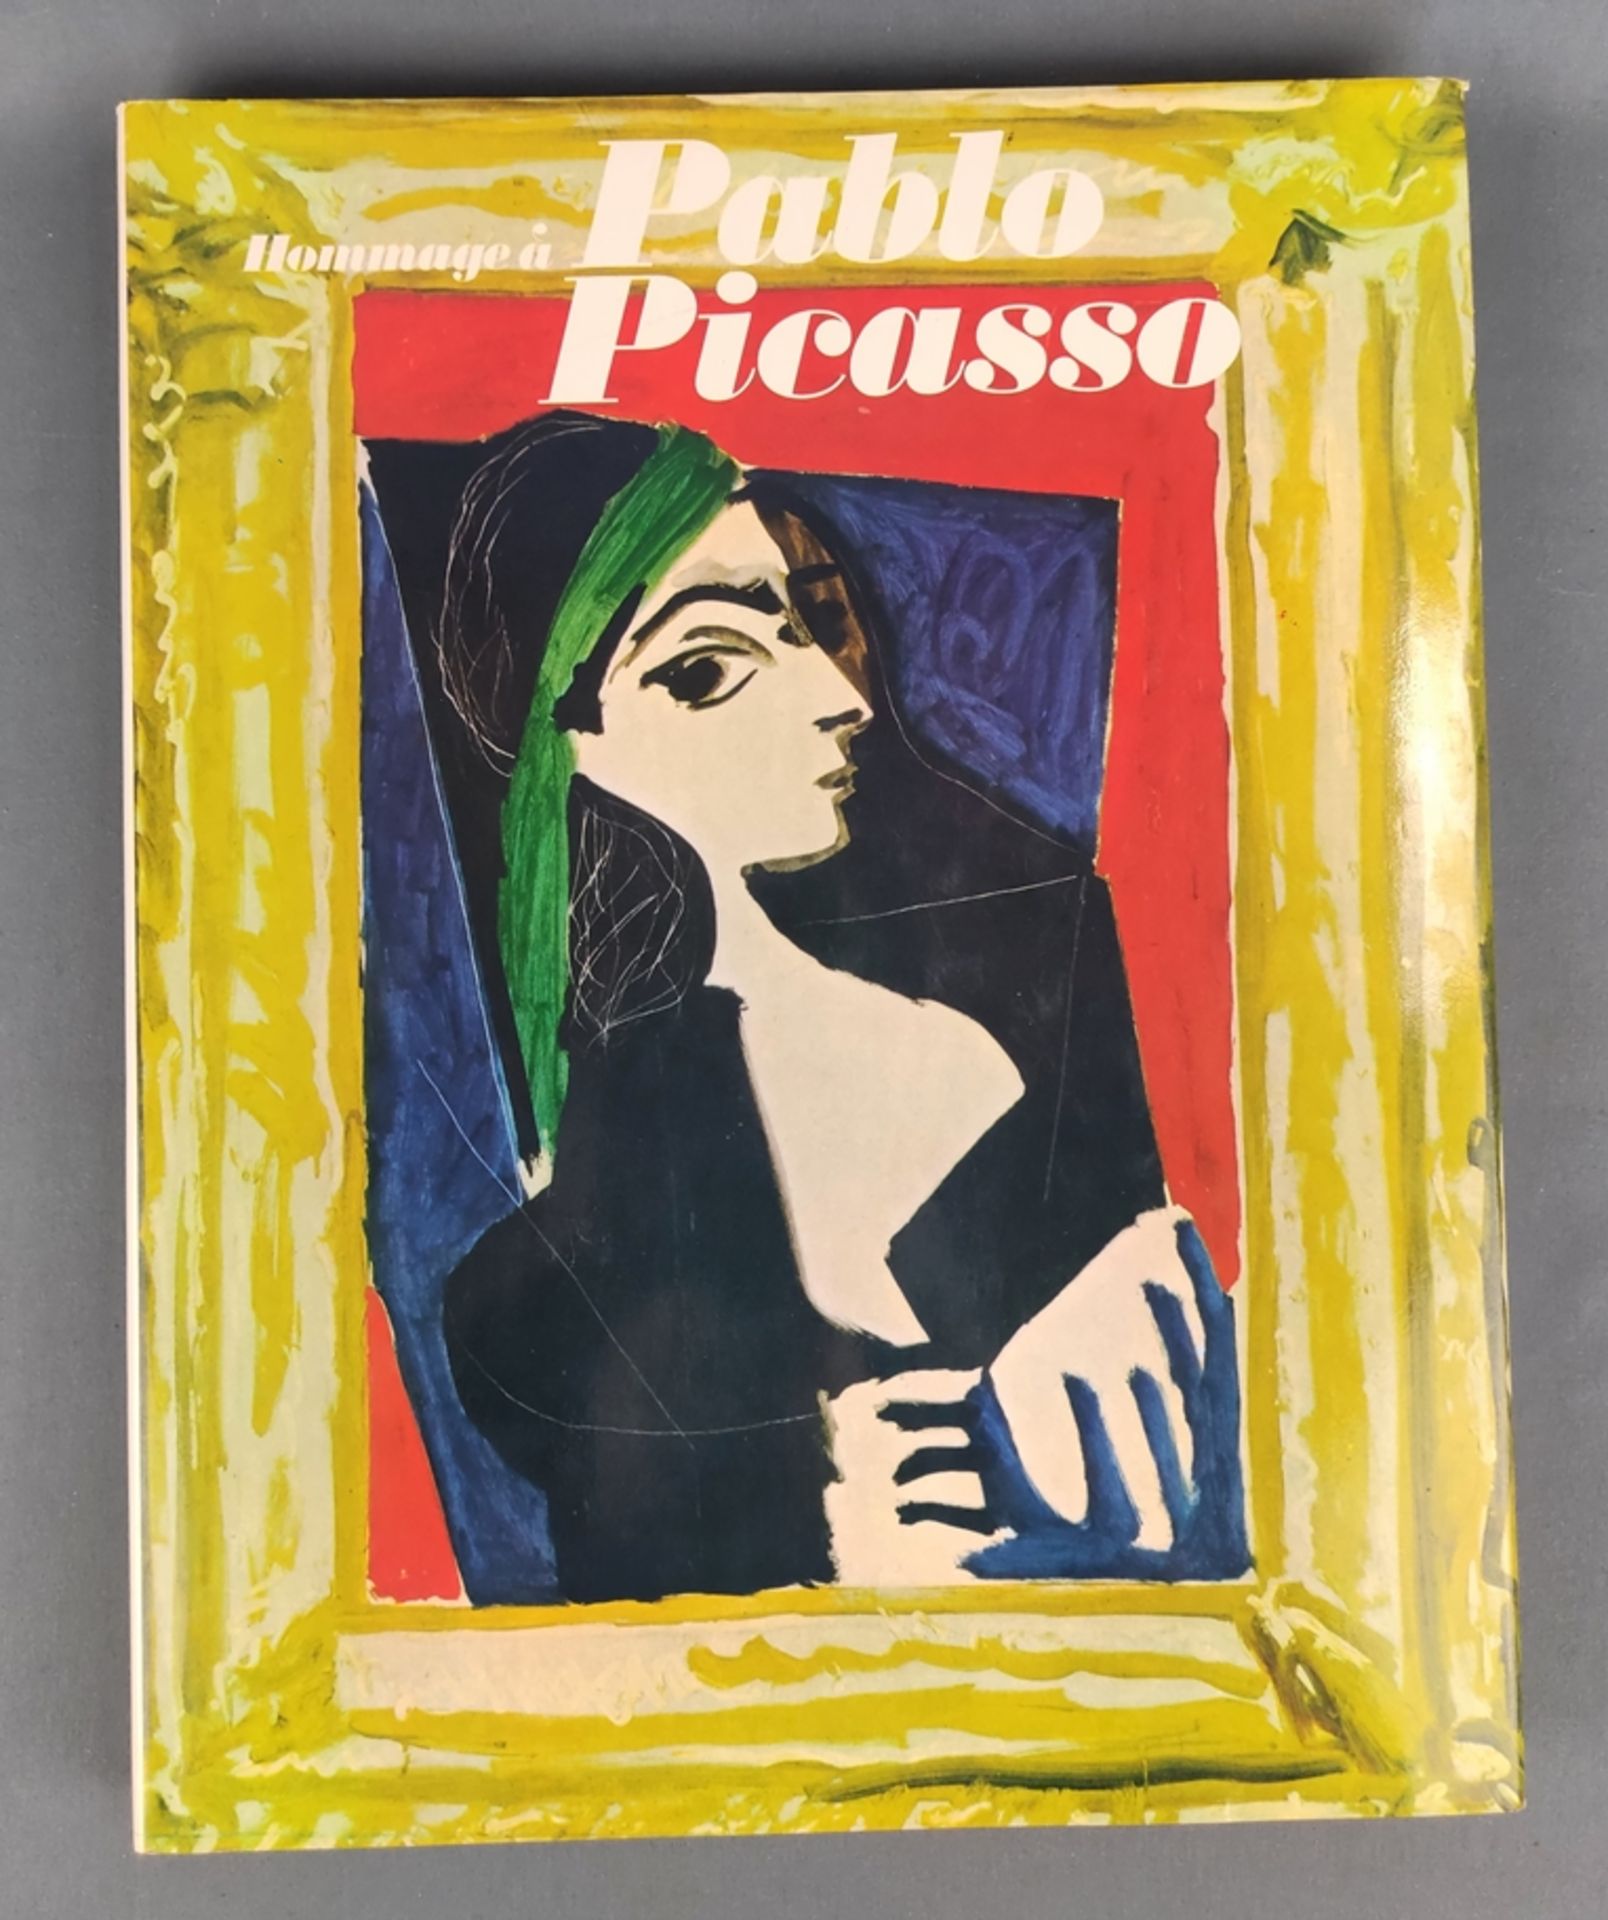 San Lazzaro, G. di (ed. ) "Hommage á Pablo Picasso", 136 pages, Ebeling, Wiesbaden 1976, with origi